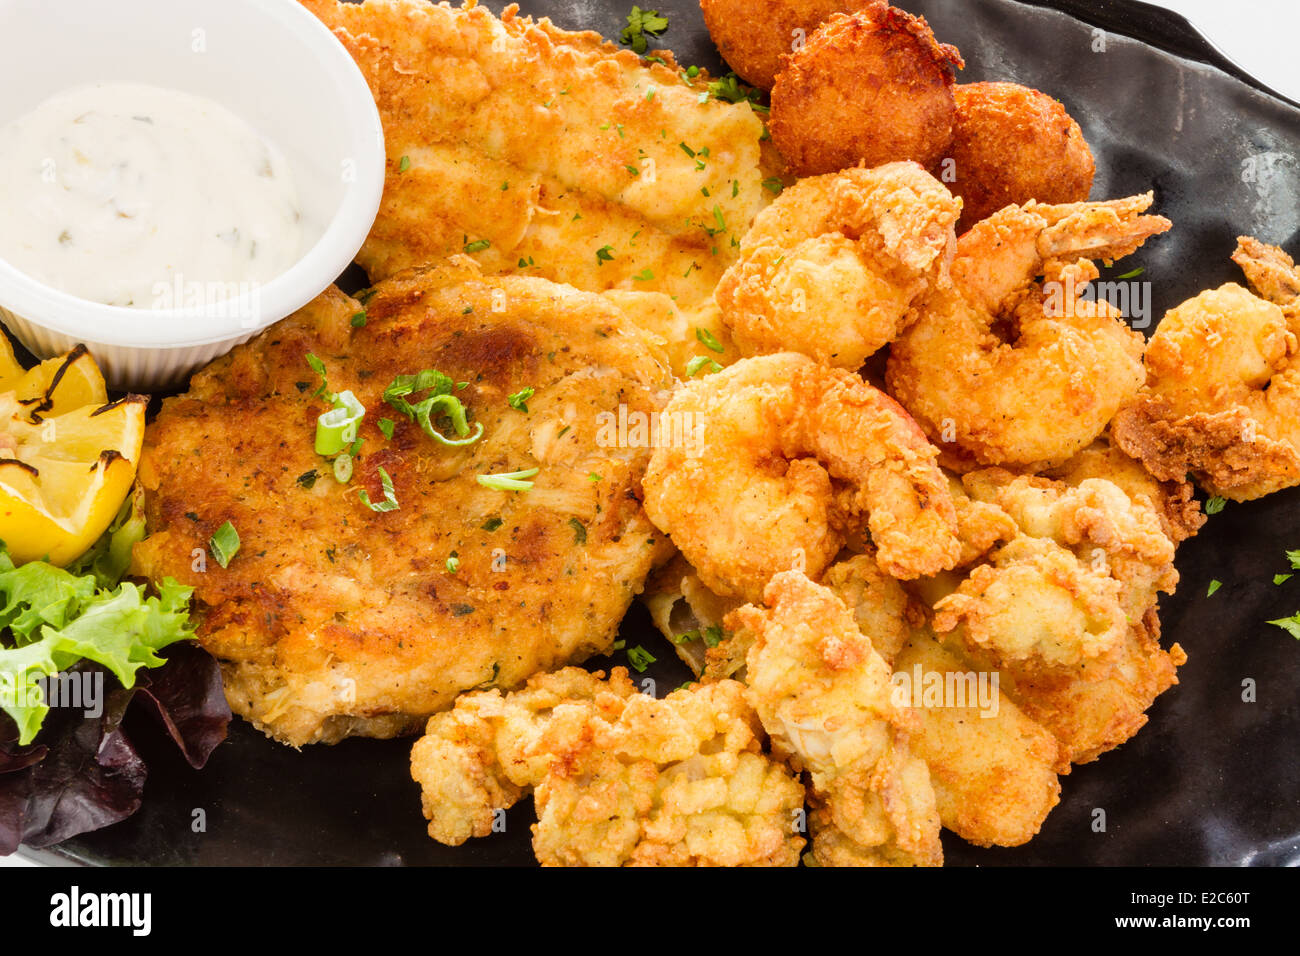 Fried seafood platter with fish, shrimp, oysters, hush puppies, and a Stock  Photo - Alamy